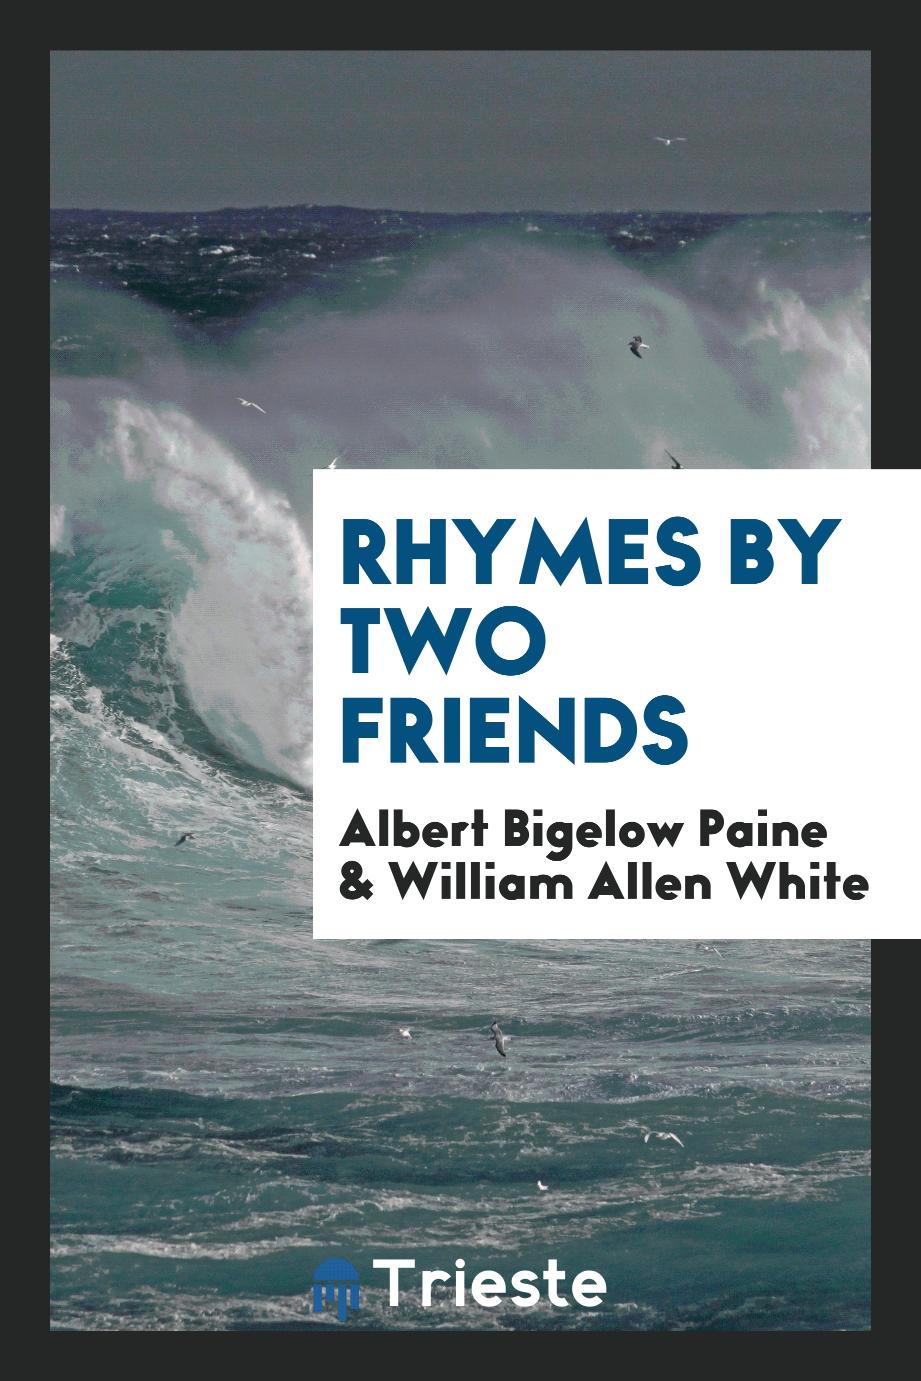 Rhymes by two friends